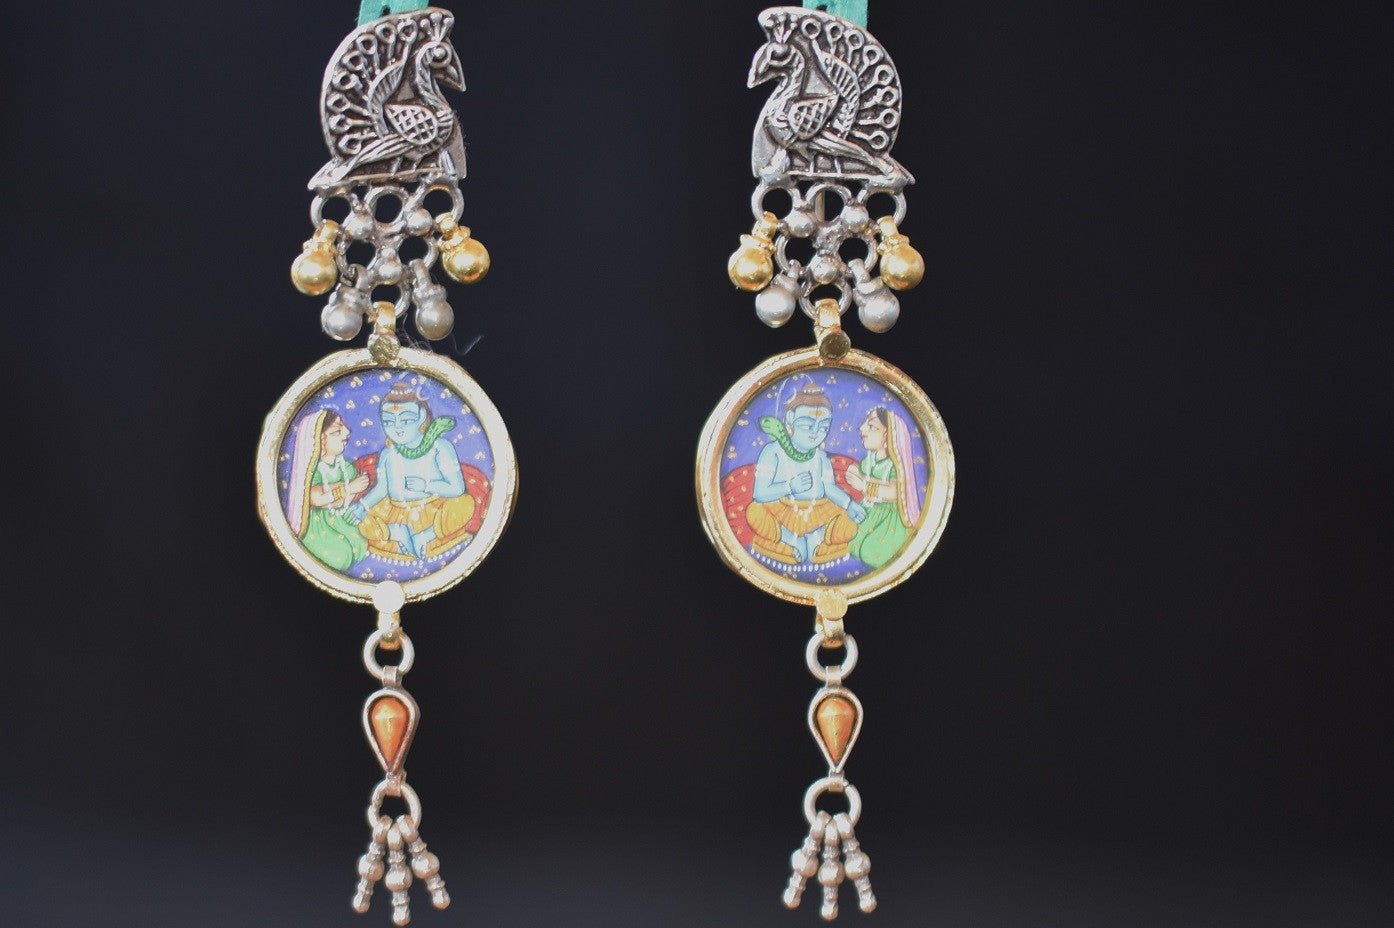 20a486-silver-gold-plated-amrapali-earrings-B